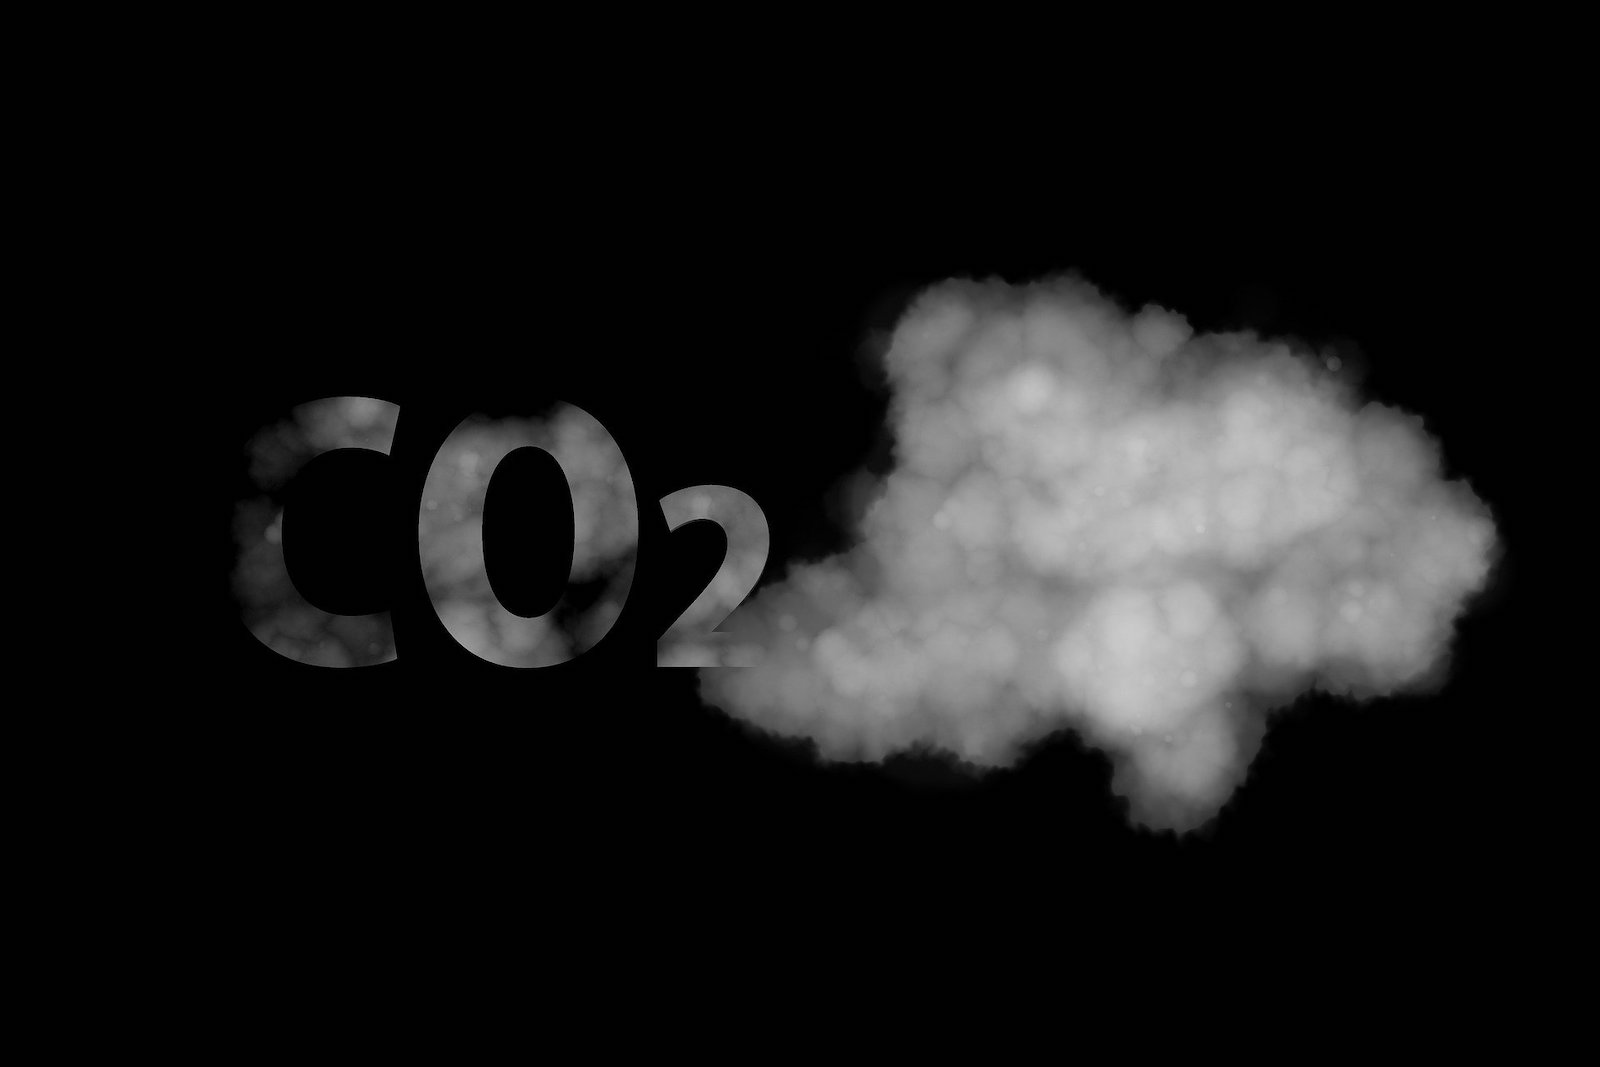 CO2-absorbing material